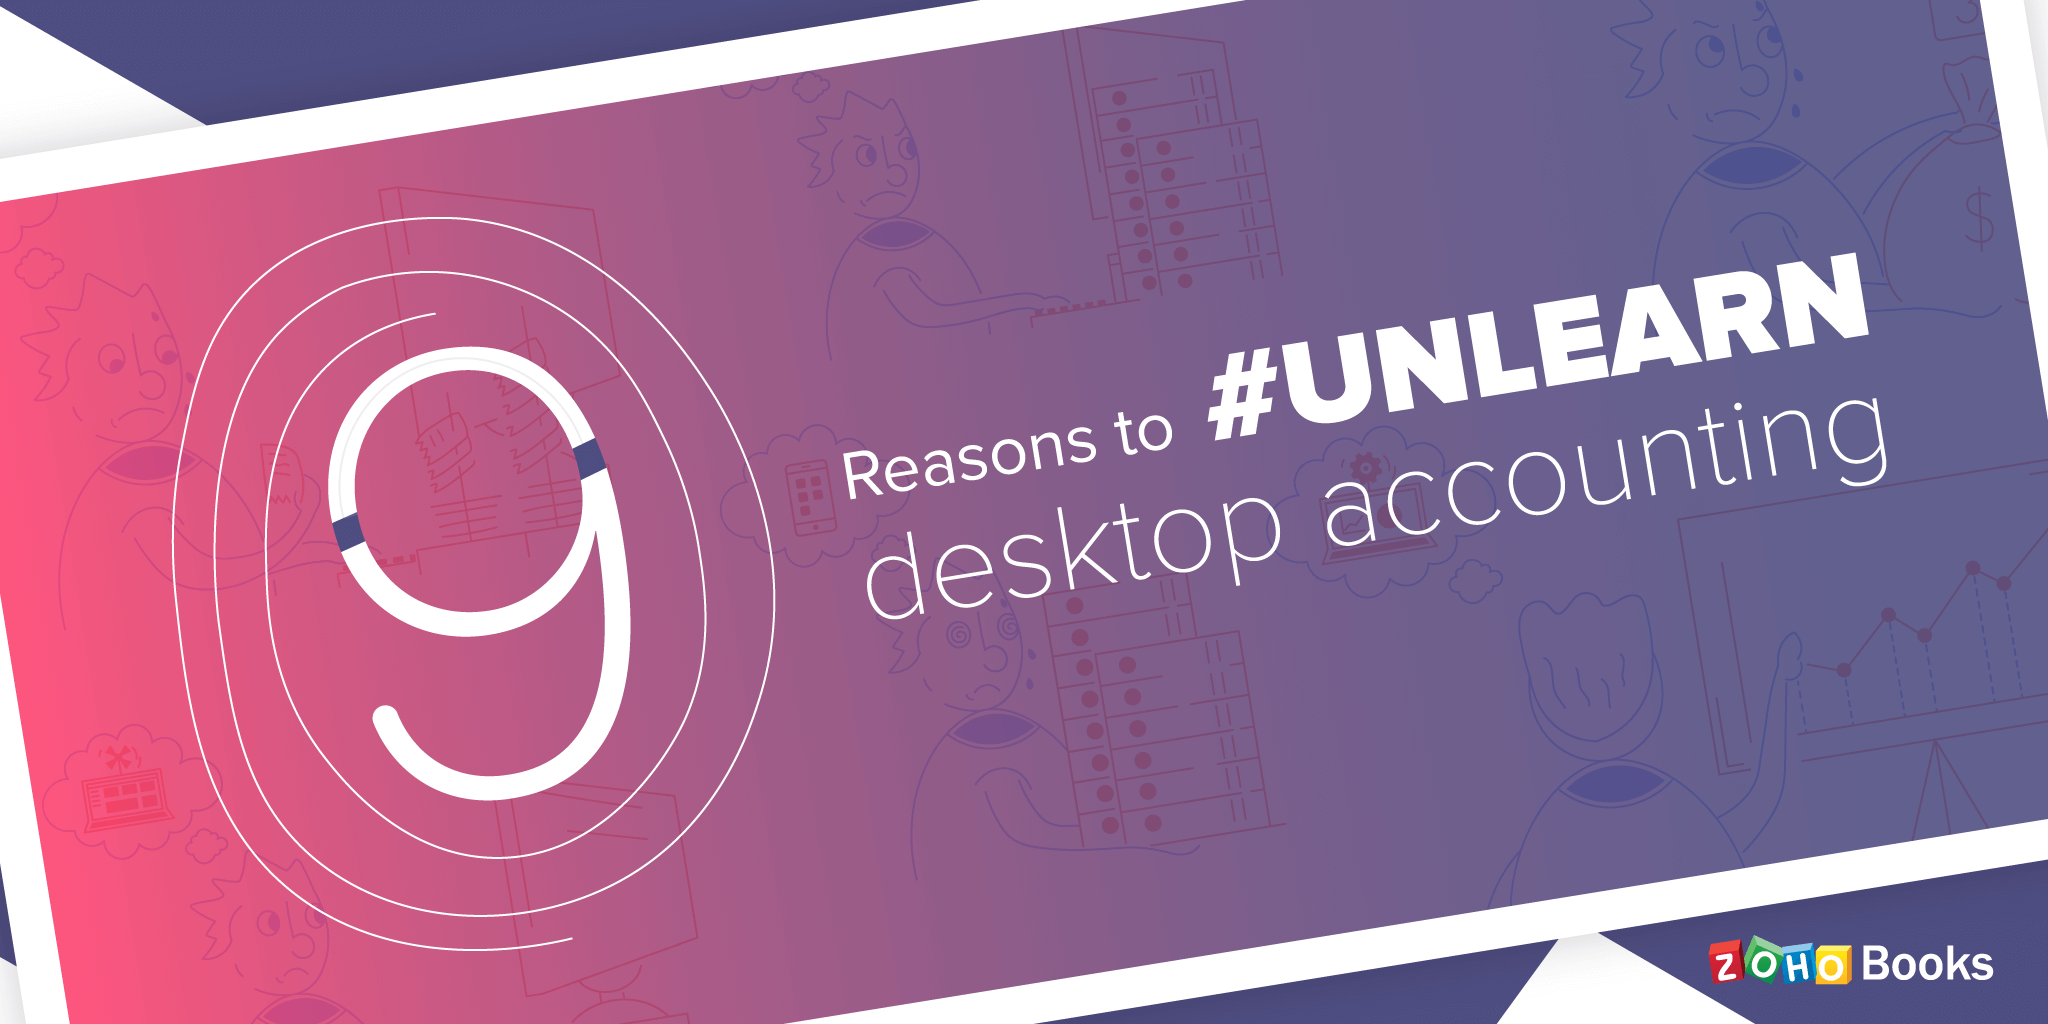 9 reasons to #unlearn desktop accounting